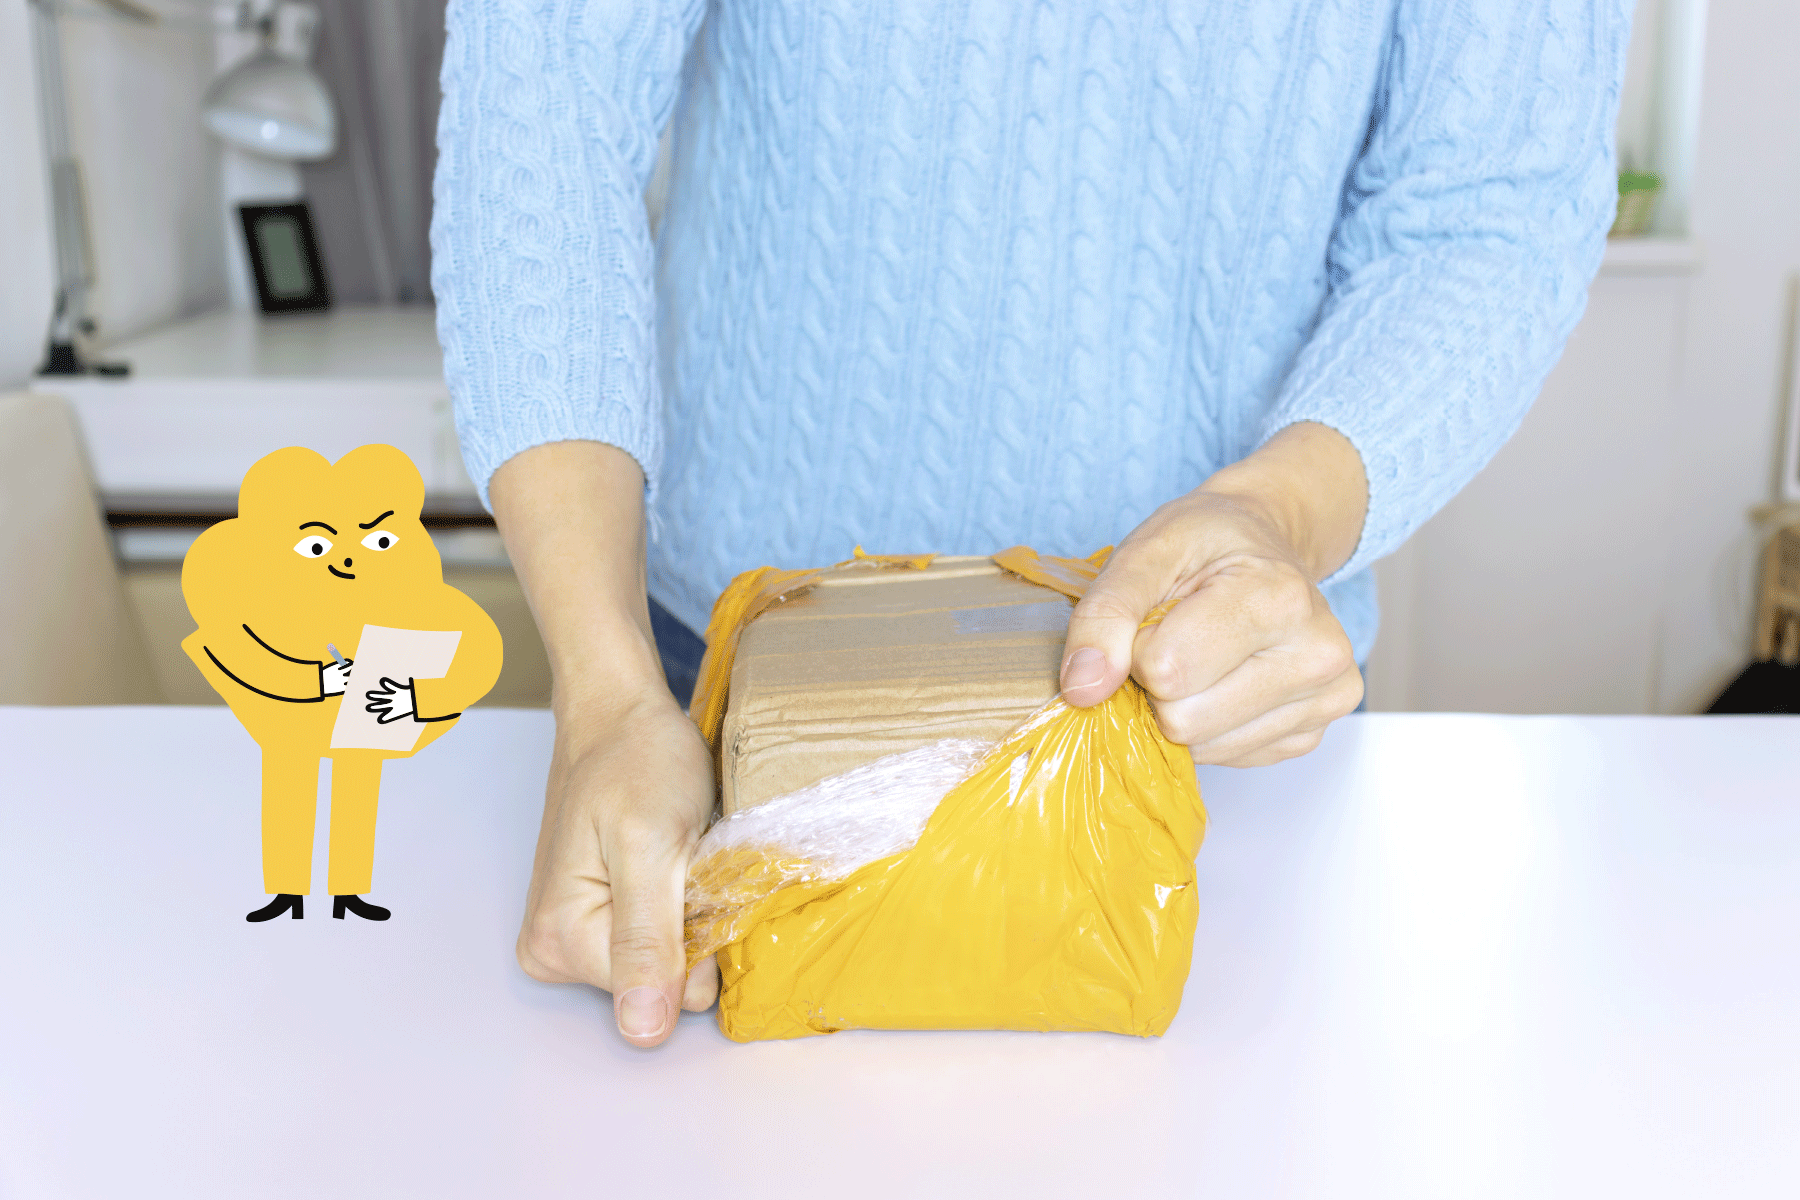 Ecommerce packaging teardown: Learnings from analysing 40+ parcels